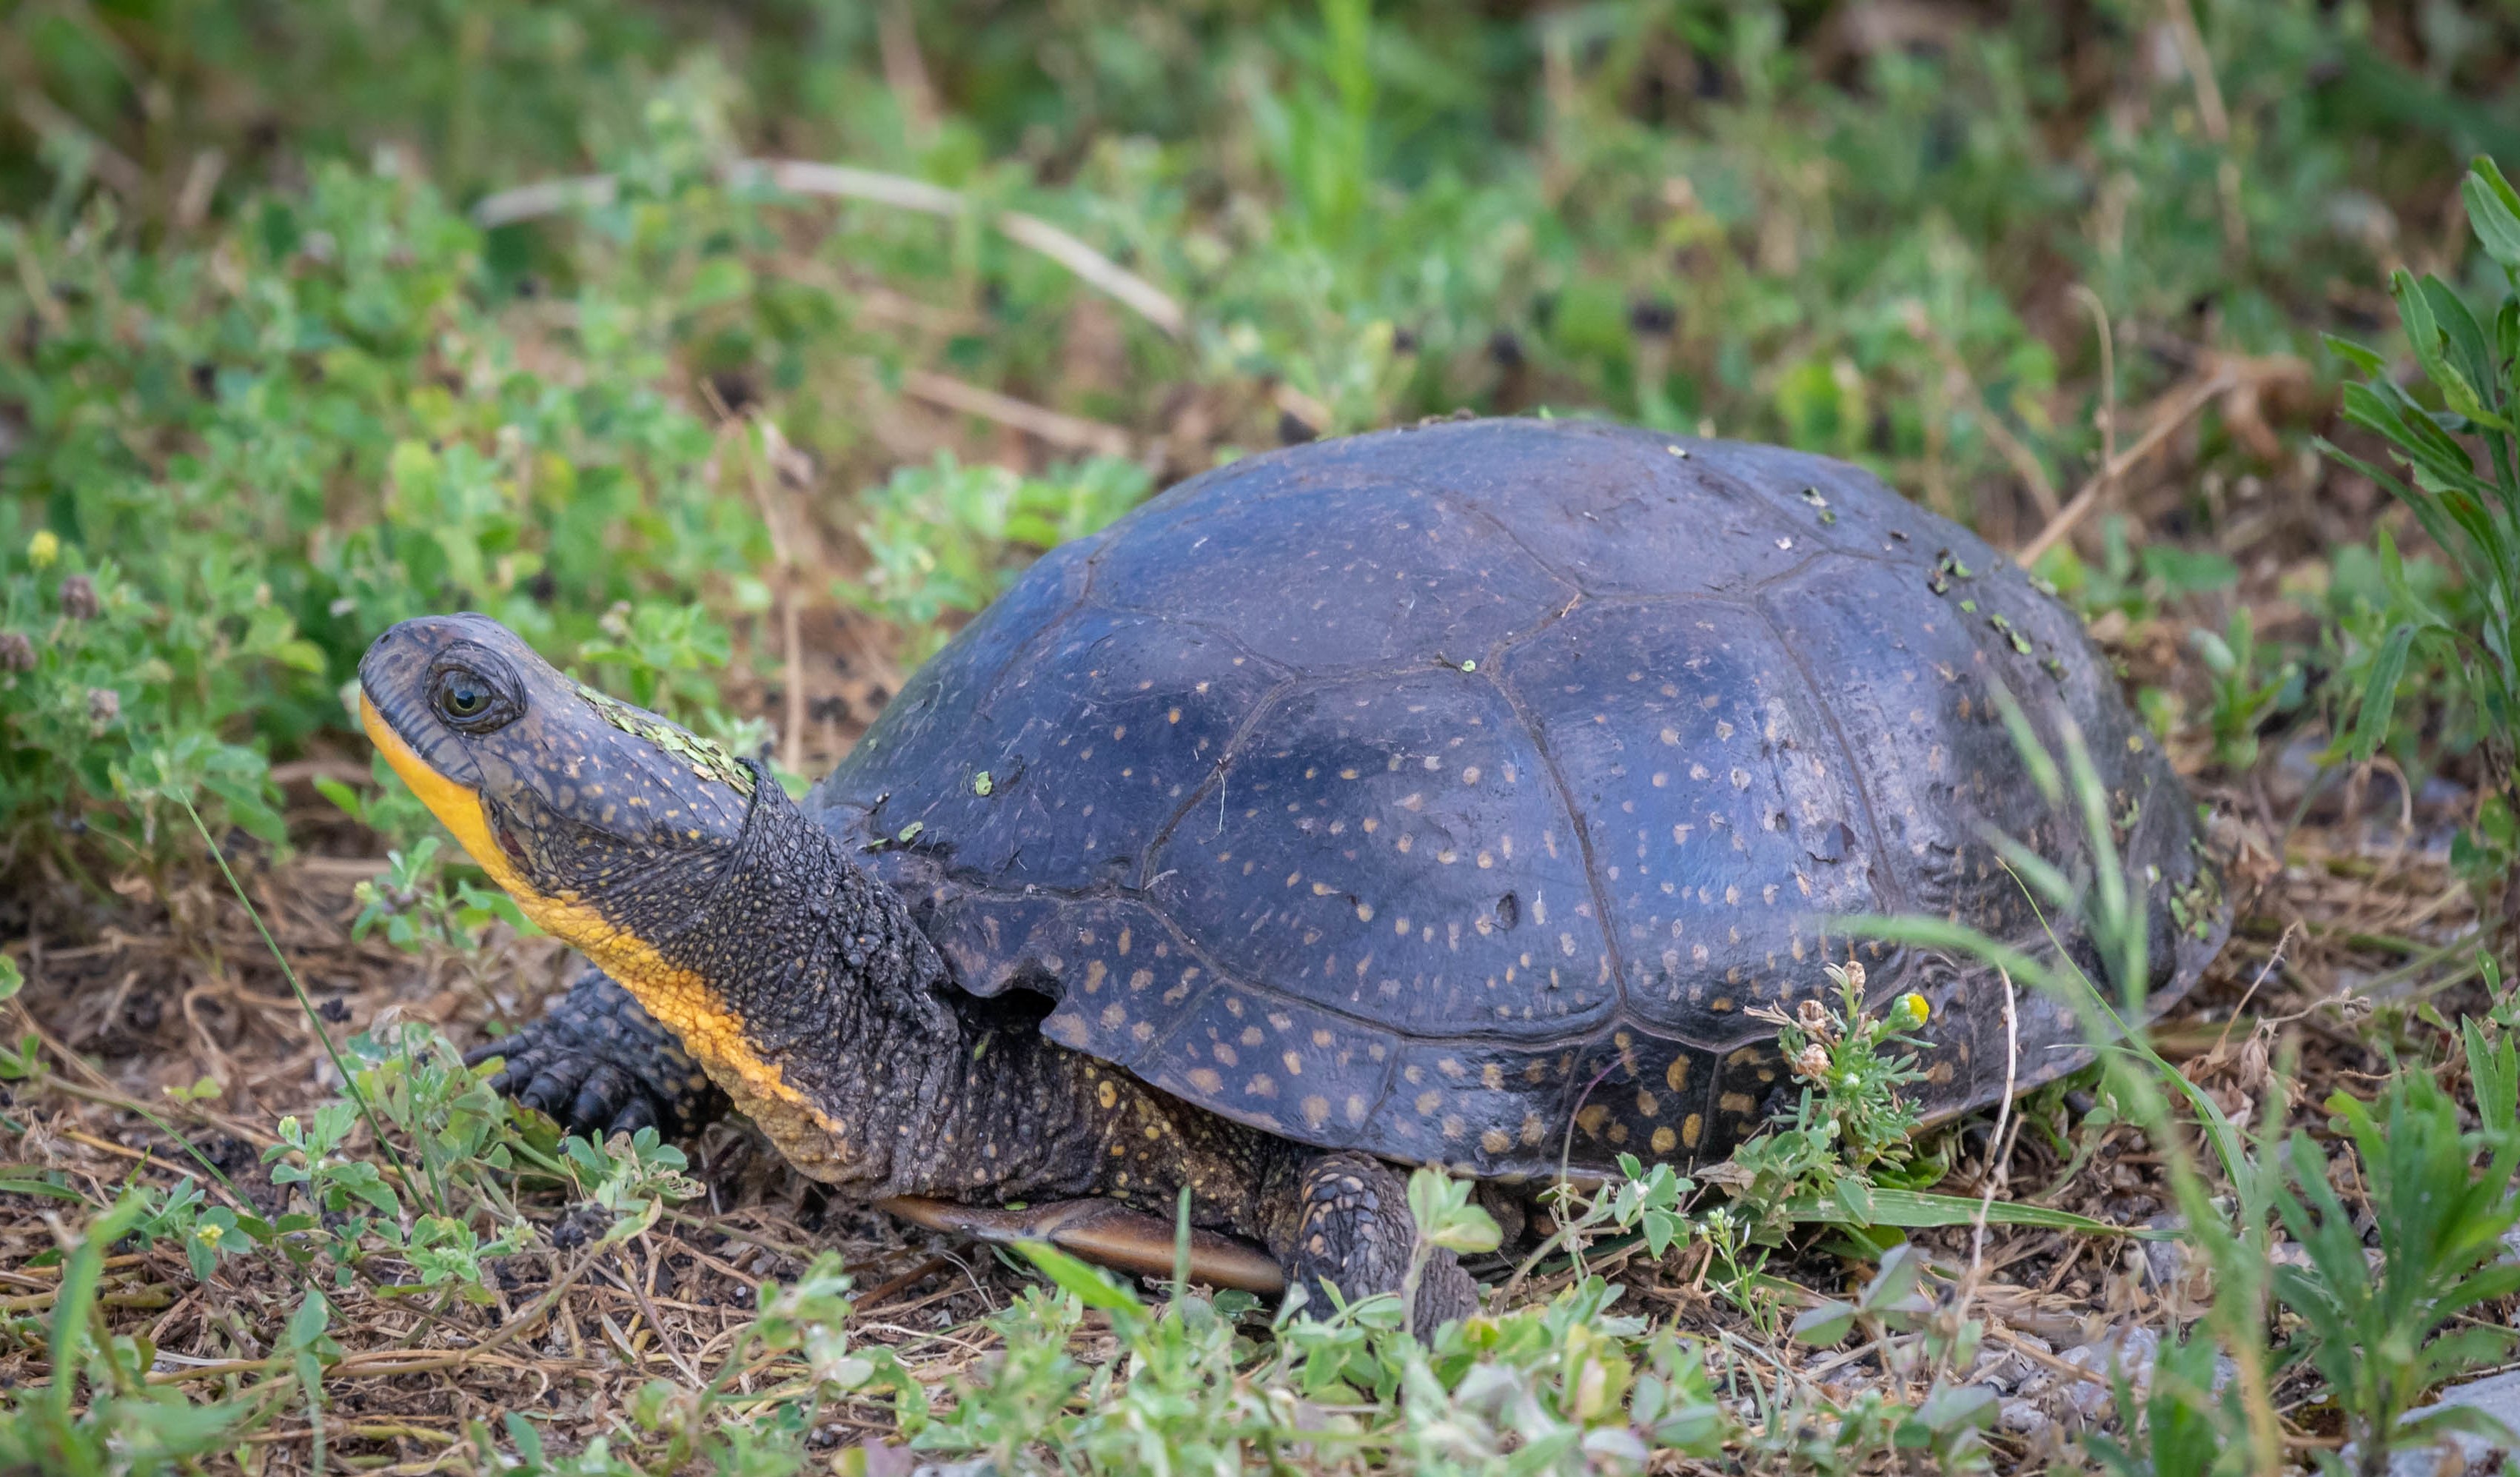 A Blanding's turtle in the grass.